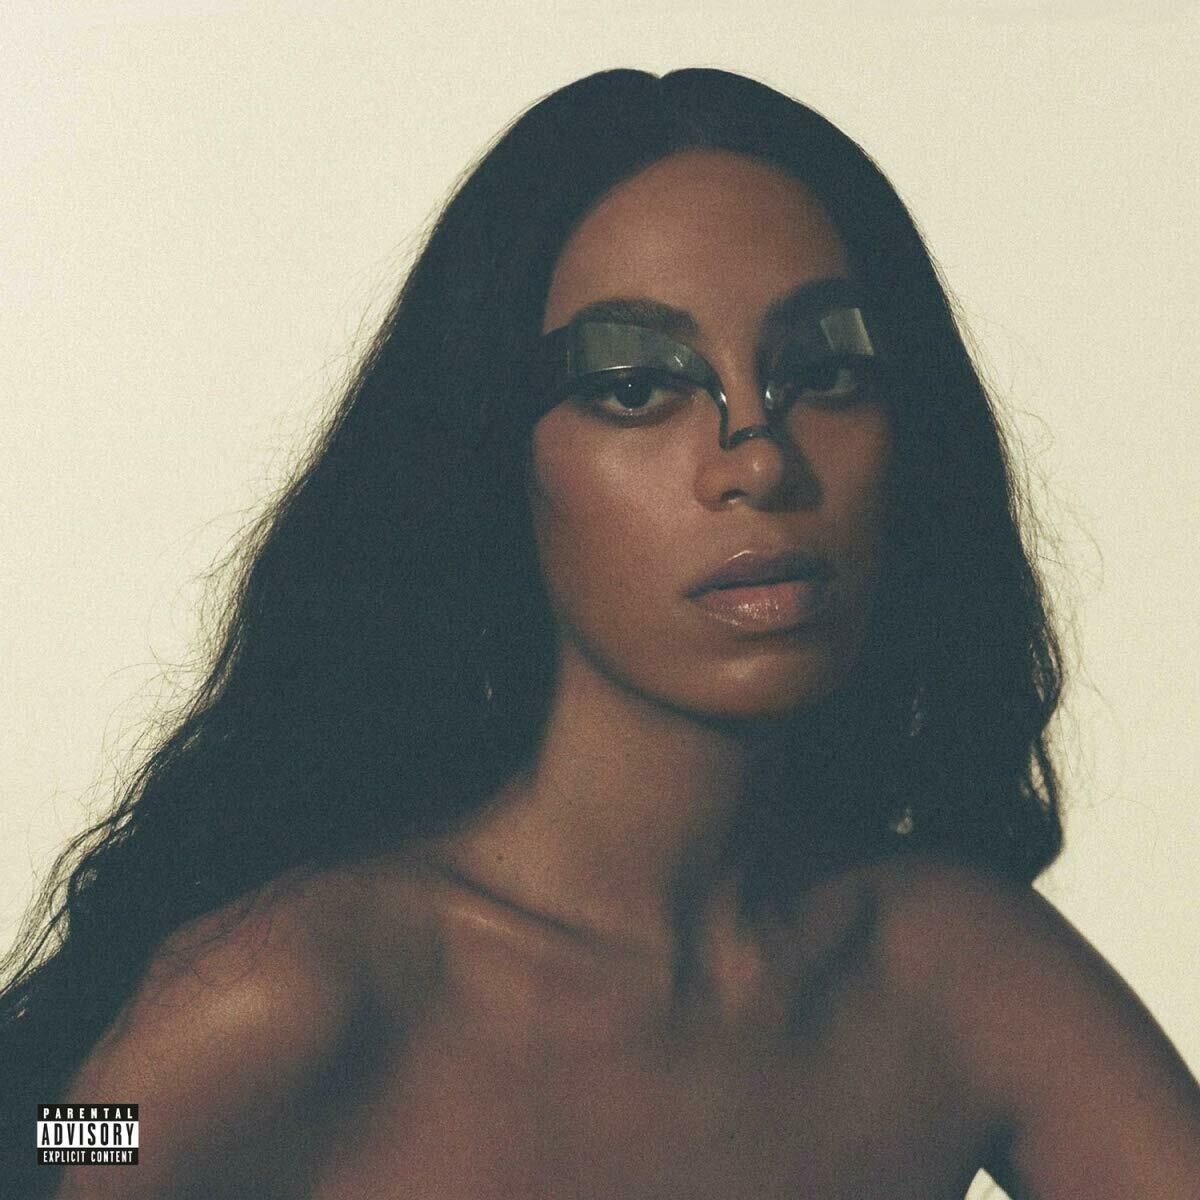 Solange "When I Get Home" *cLeAr ViNyL!*